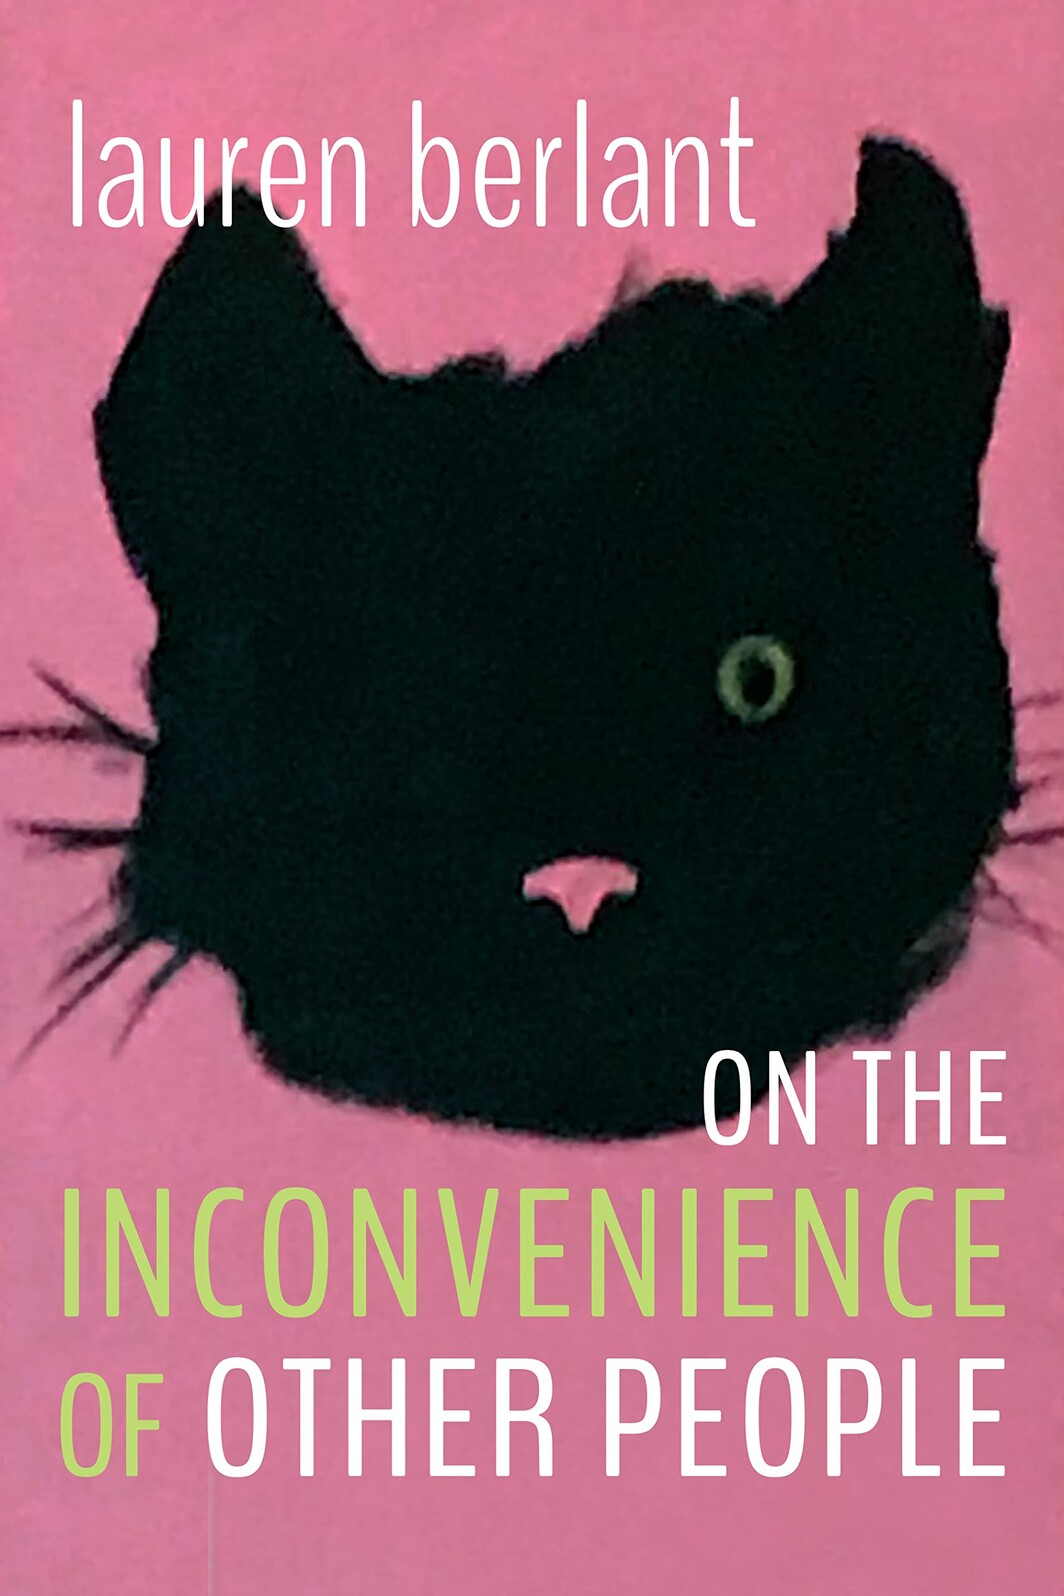 The cover of On the Inconvenience of Other People